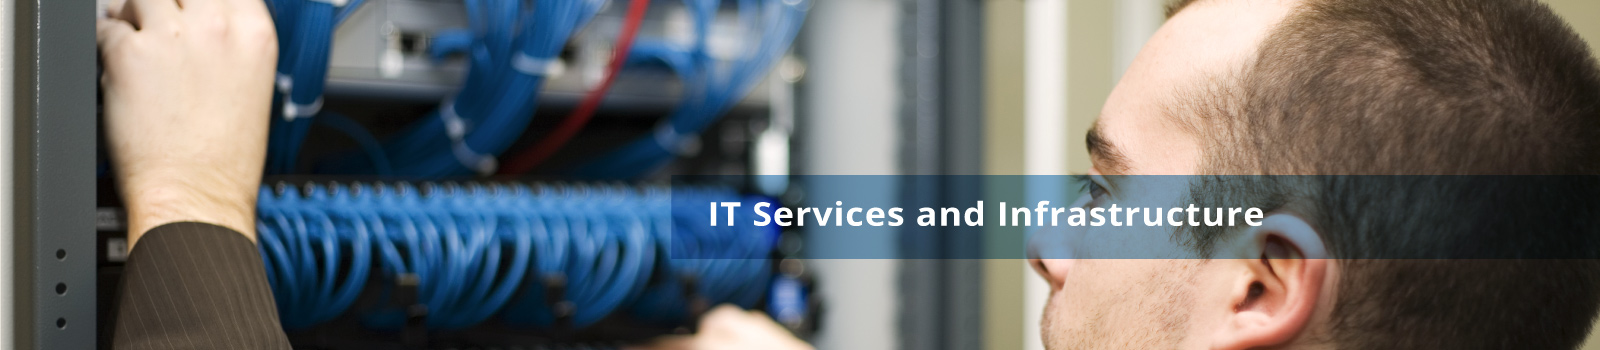 IT Services and Infrastructure